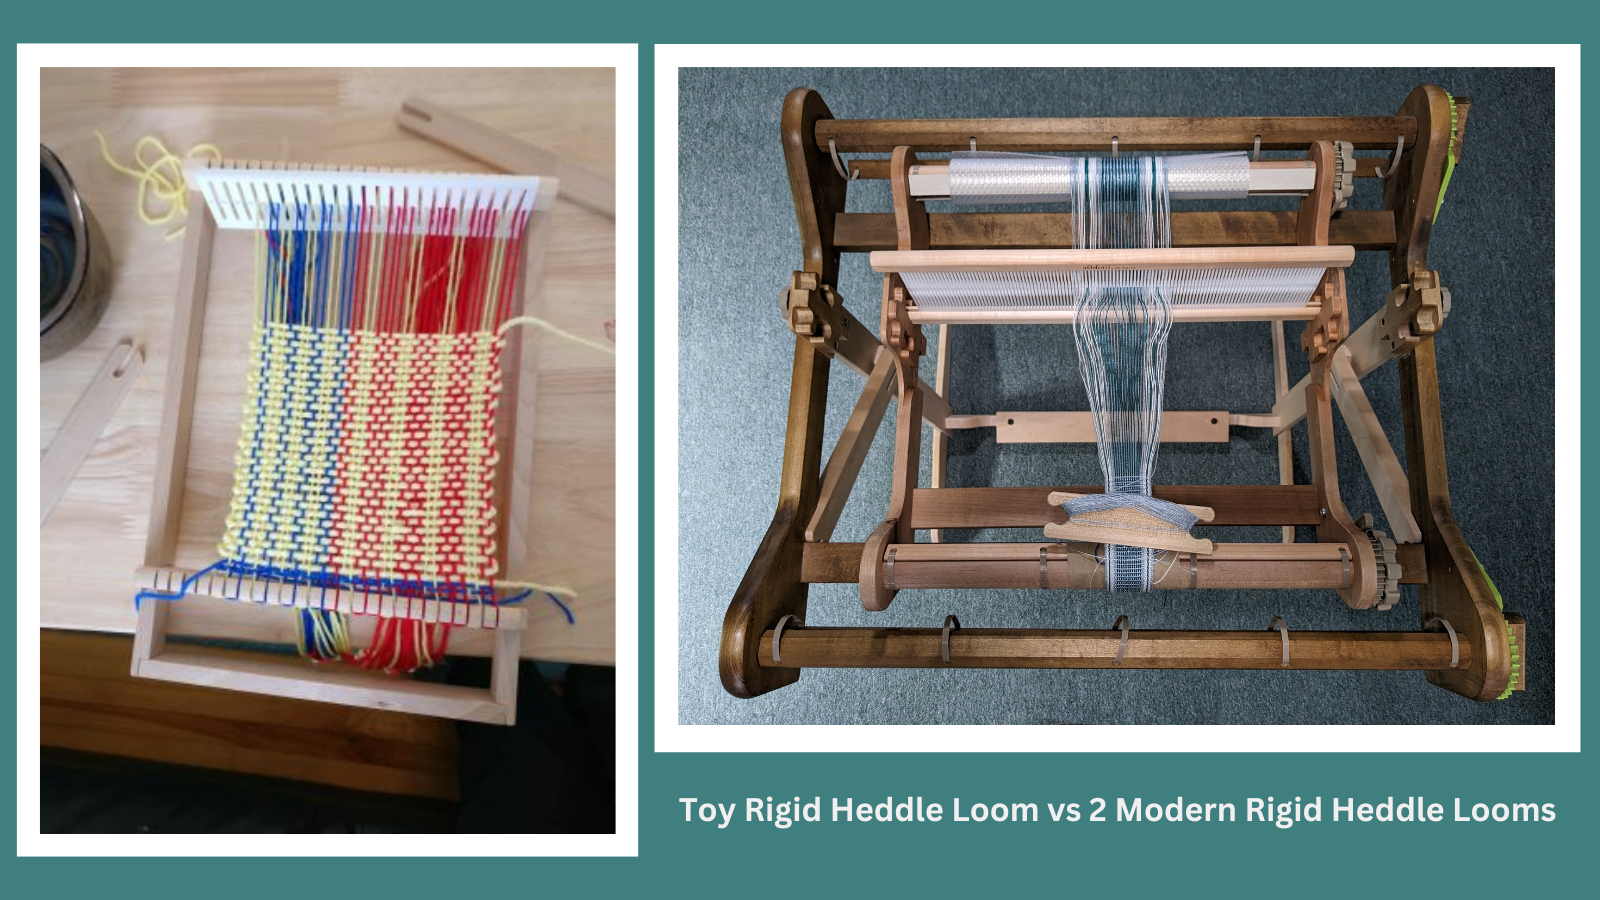 A toy rigid heddle loom on the left, compared to 2 full featured looms on the right